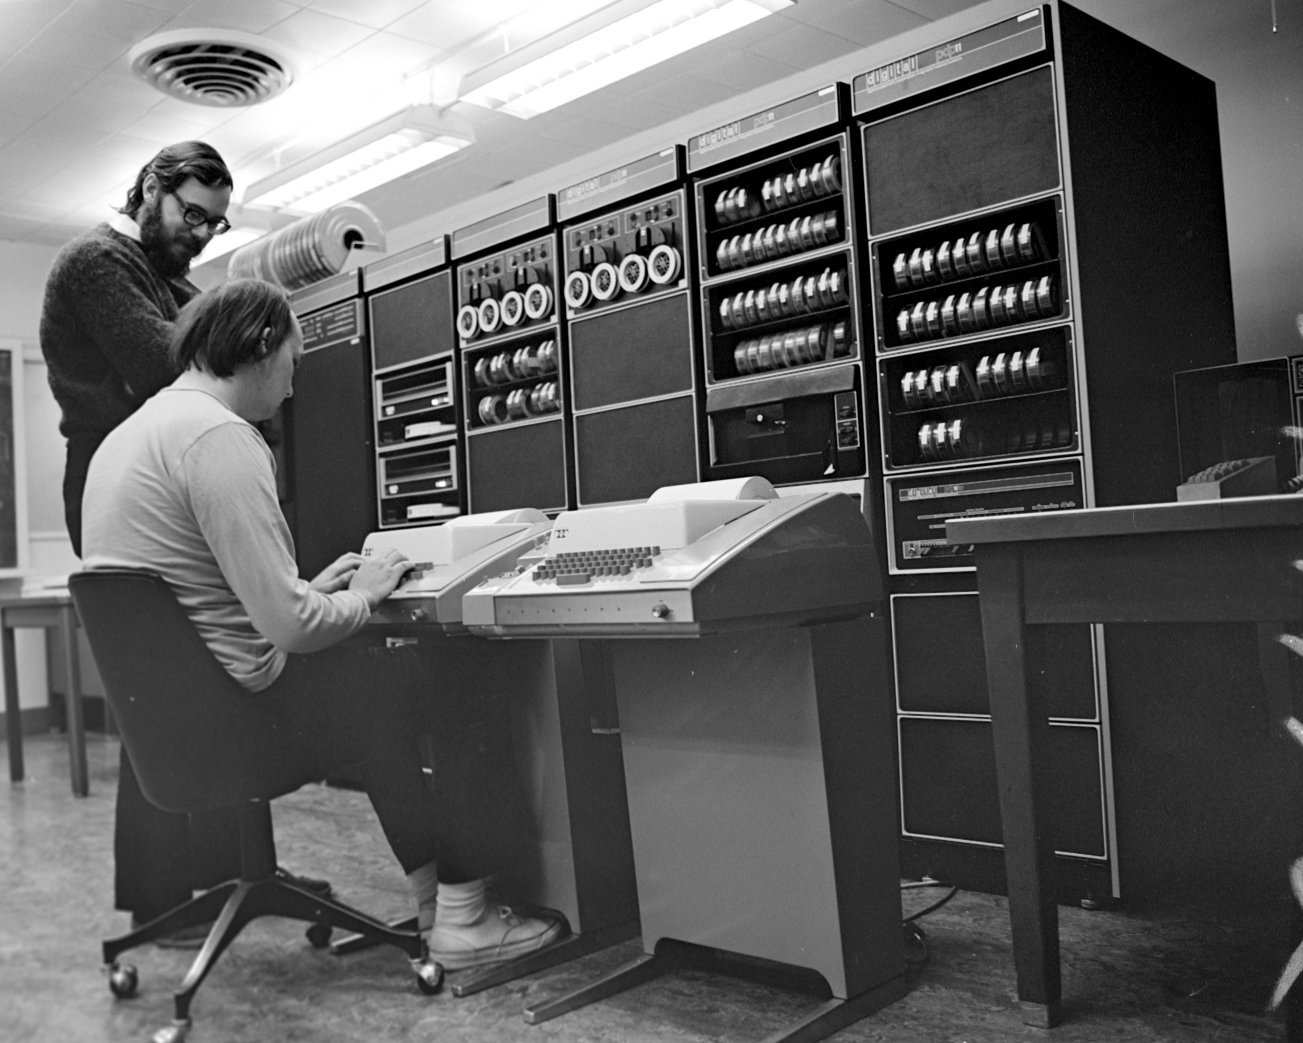 http://s3.picofile.com/file/8190269384/Ken_Thompson_sitting_and_Dennis_Ritchie_at_PDP_11.jpg